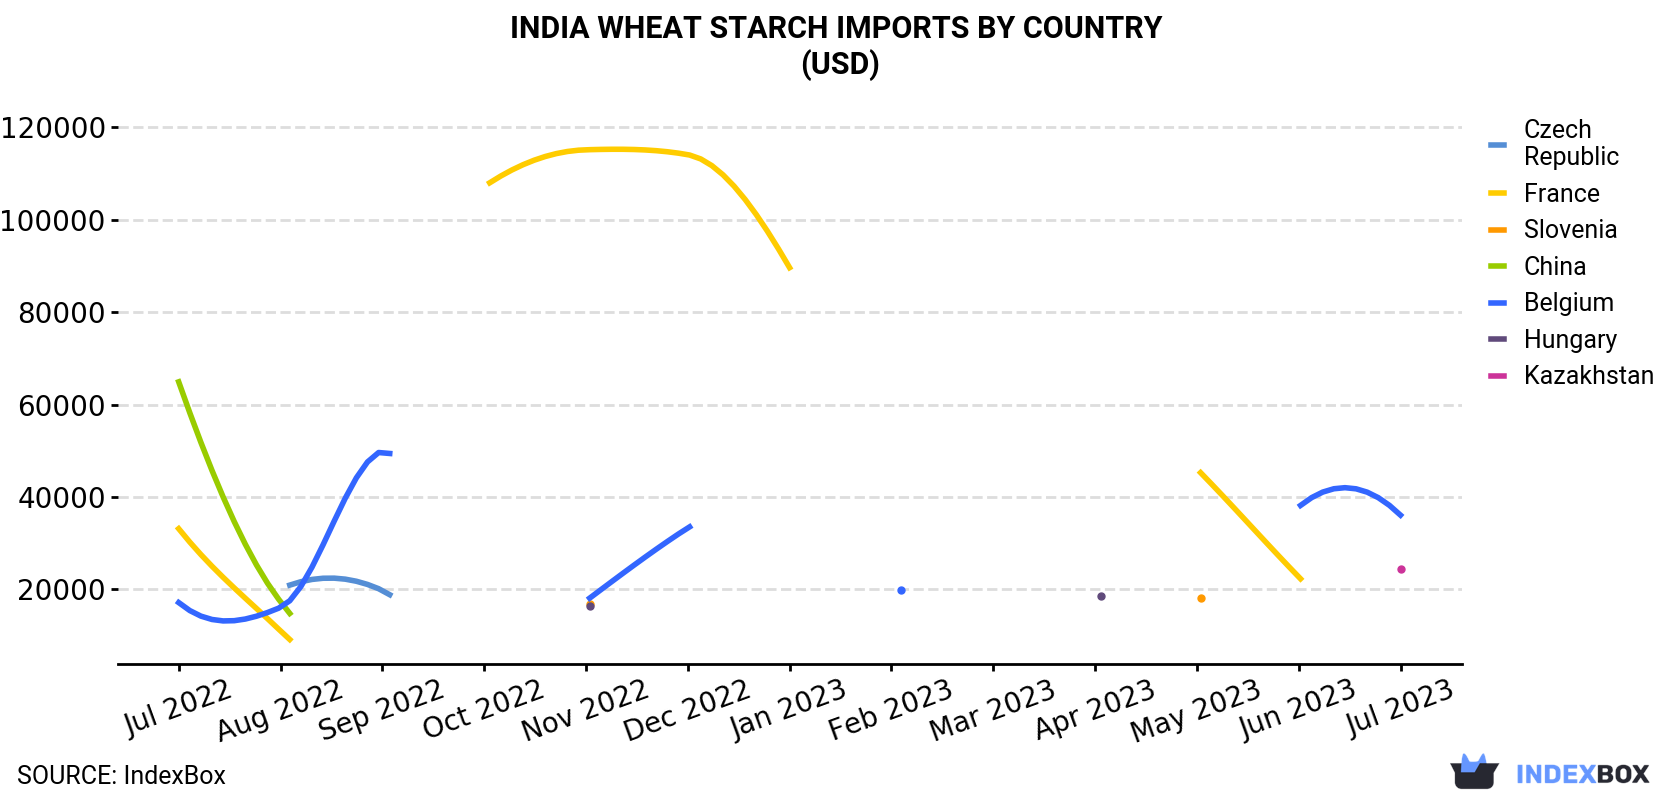 India Wheat Starch Imports By Country (USD)